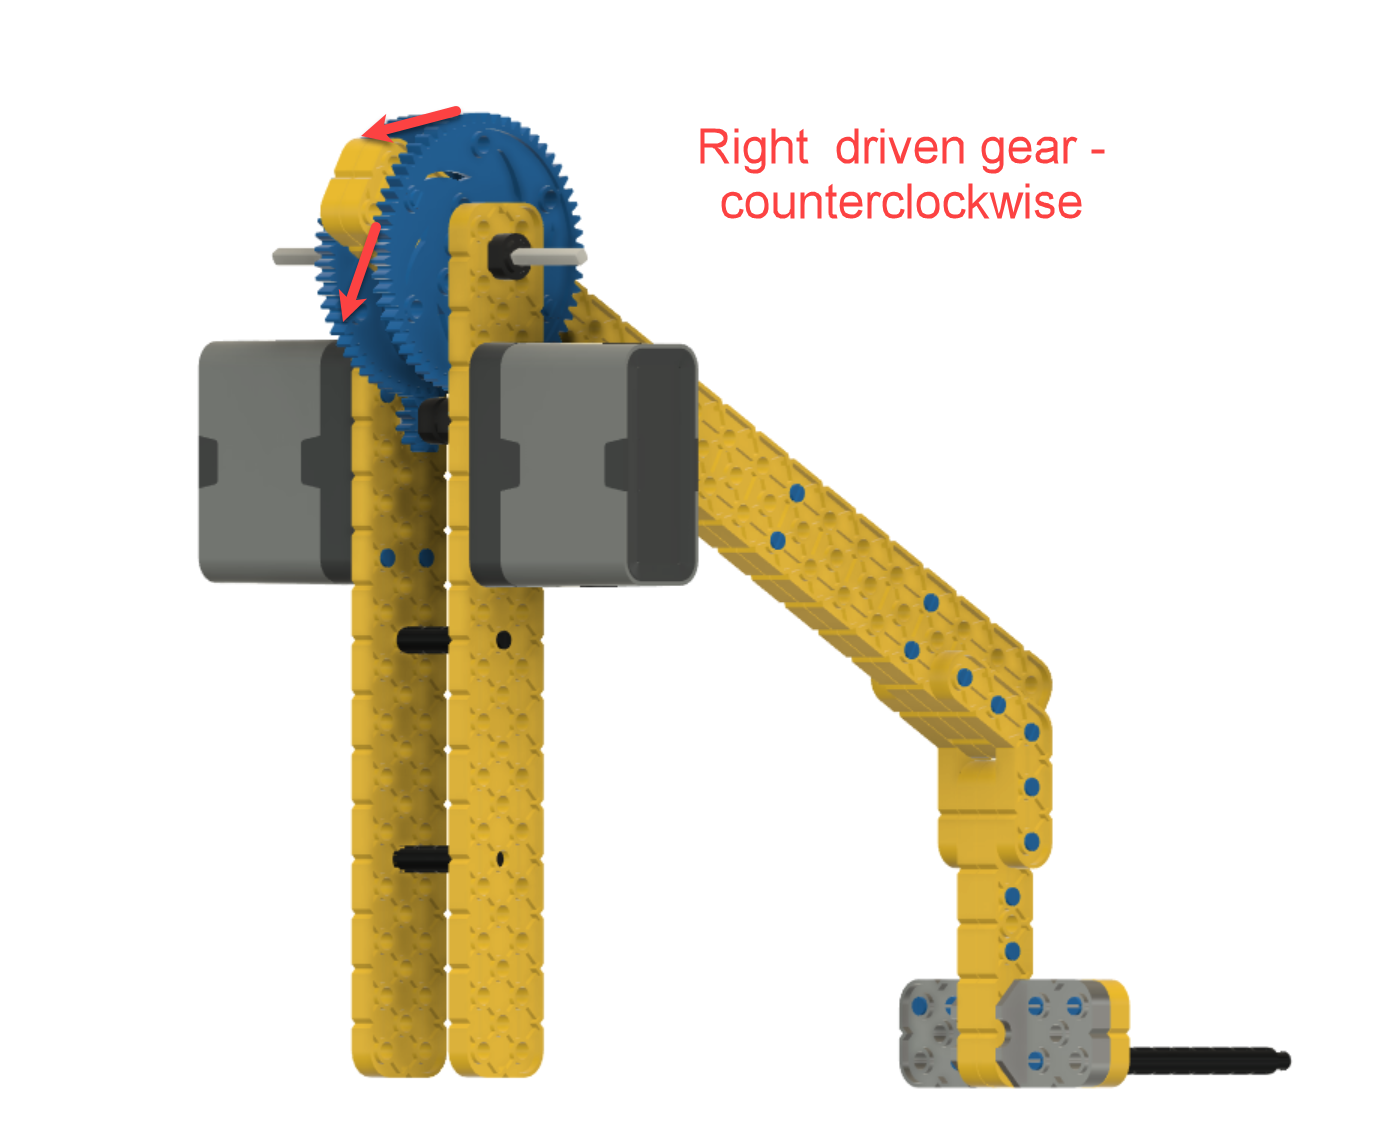 right driven gear - counterclockwise